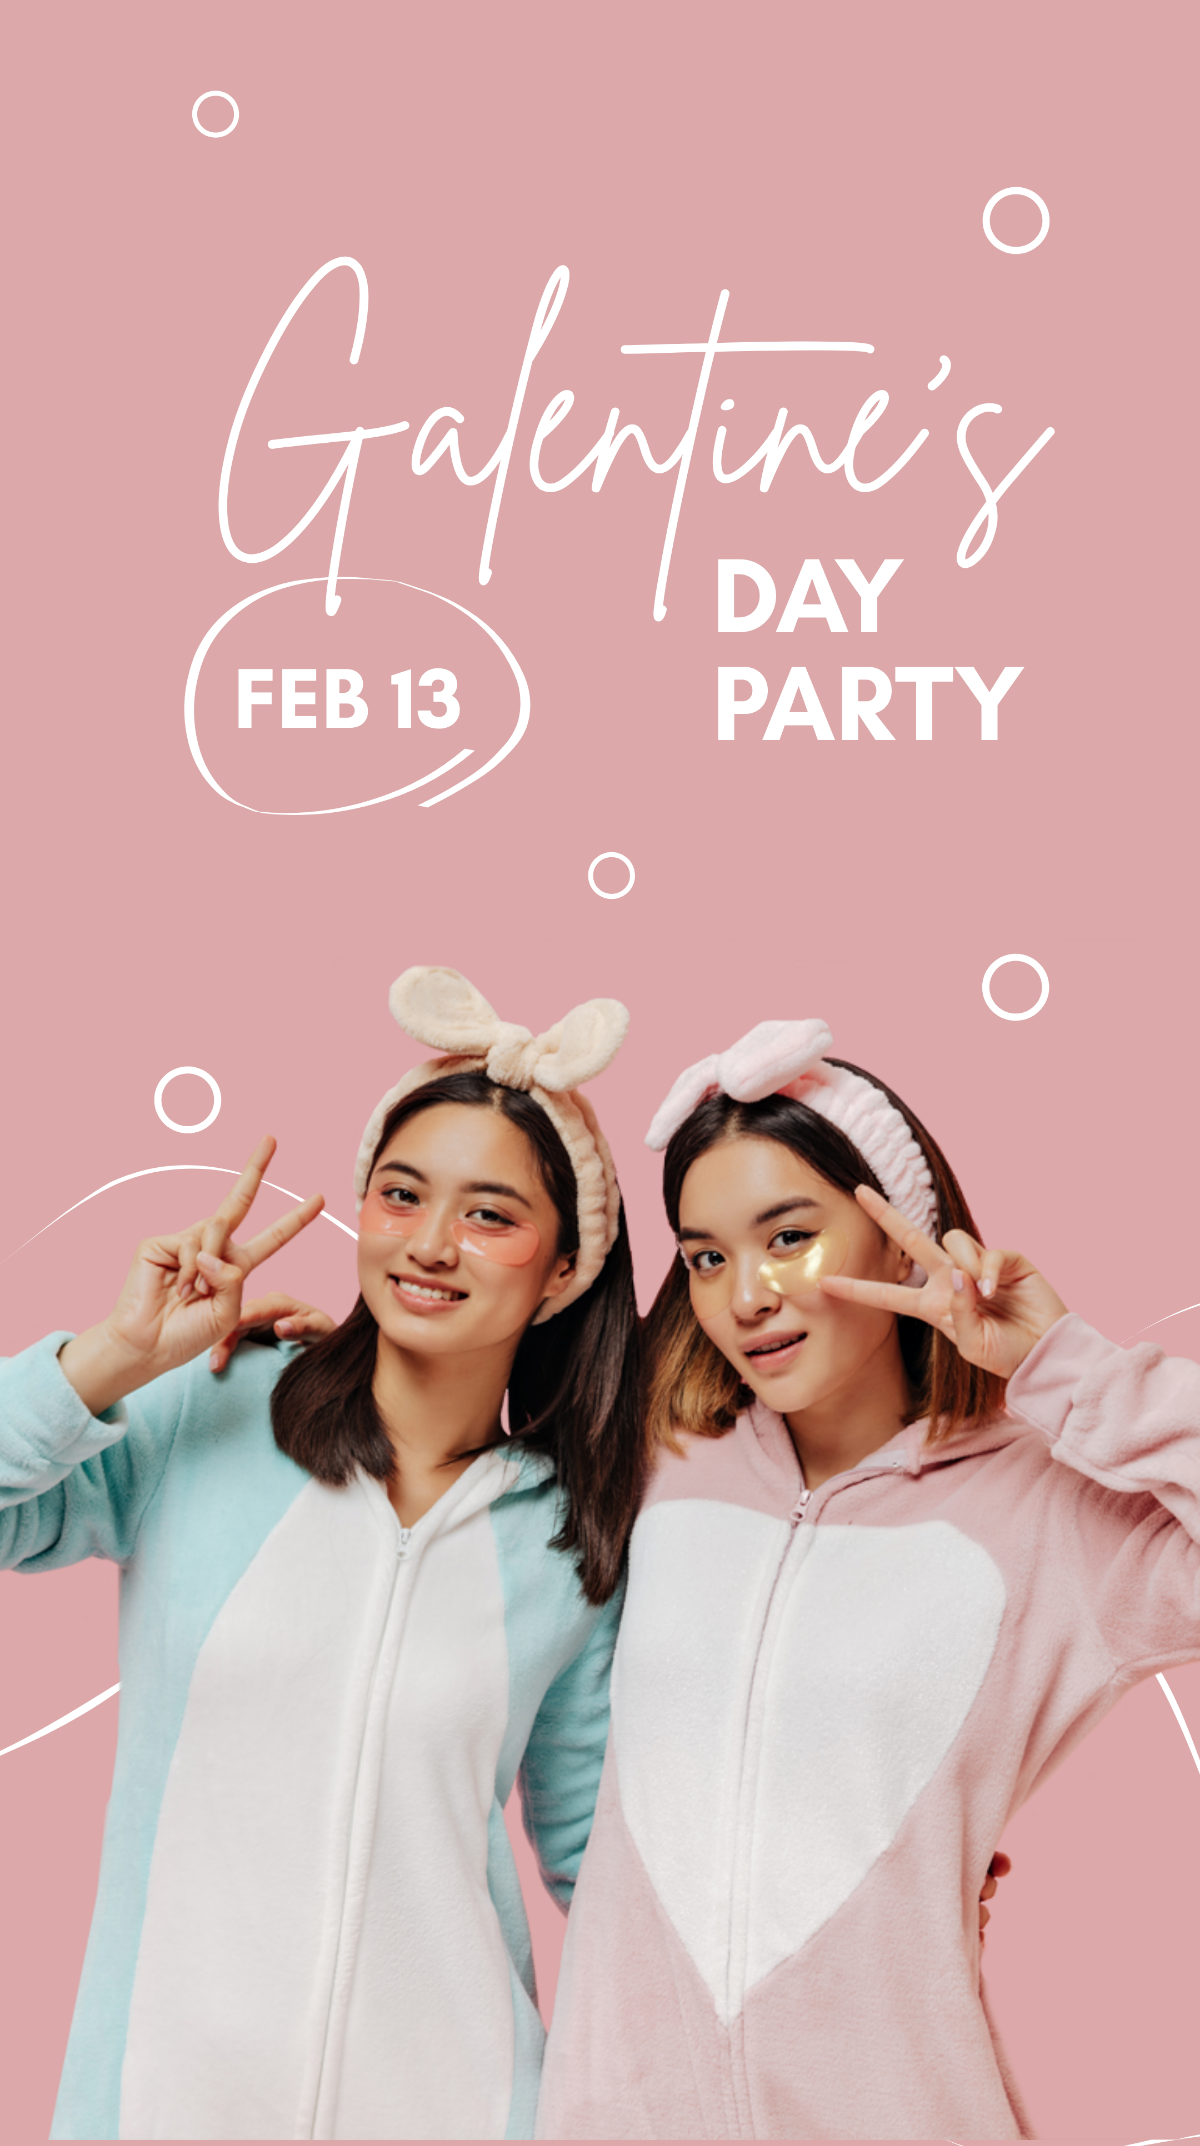 Galentines Day Party Instagram Story